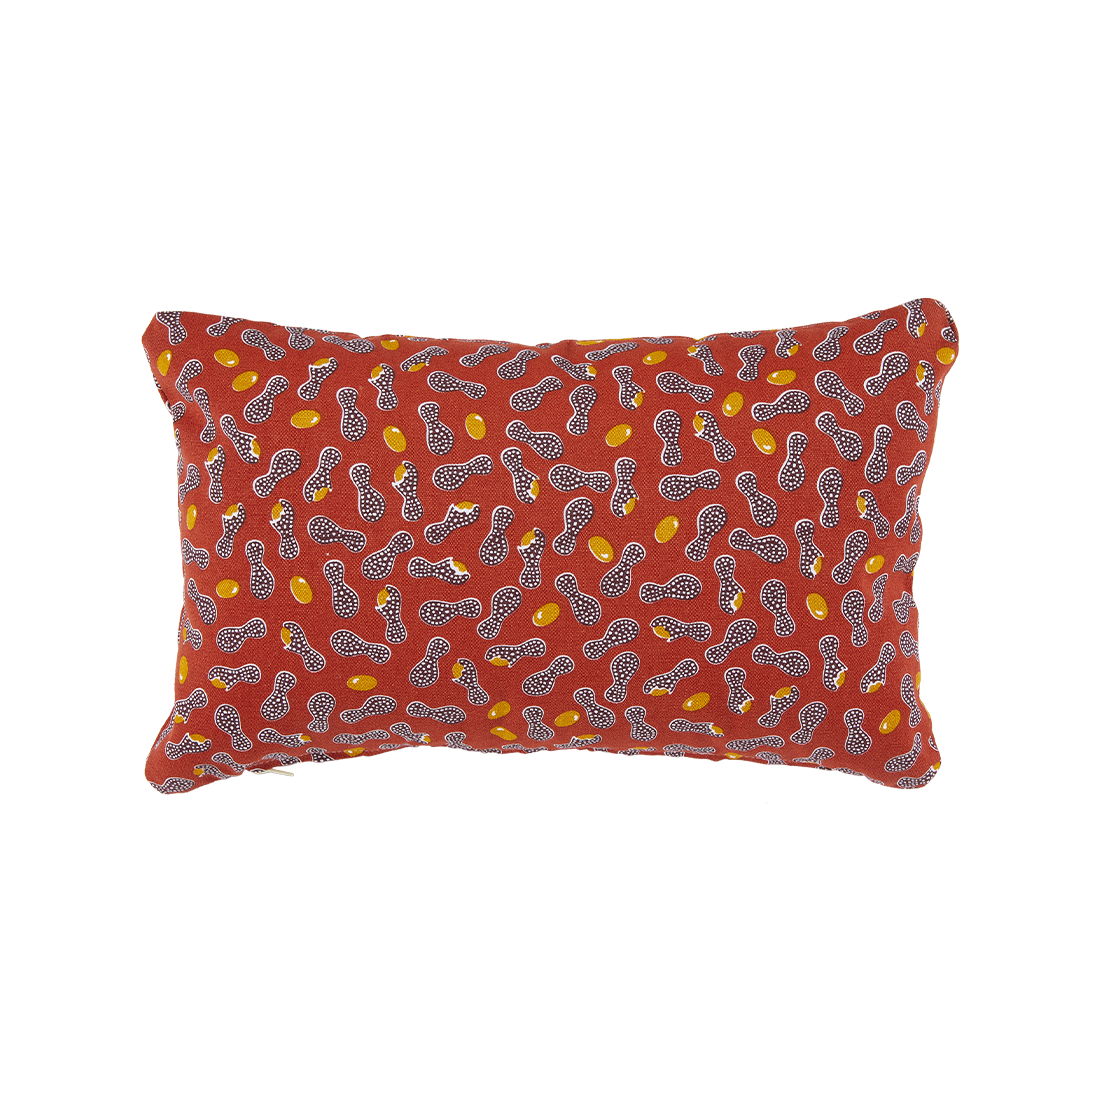 COUSSIN OUTDOOR CACAHUÈTES 44 X 30 CM